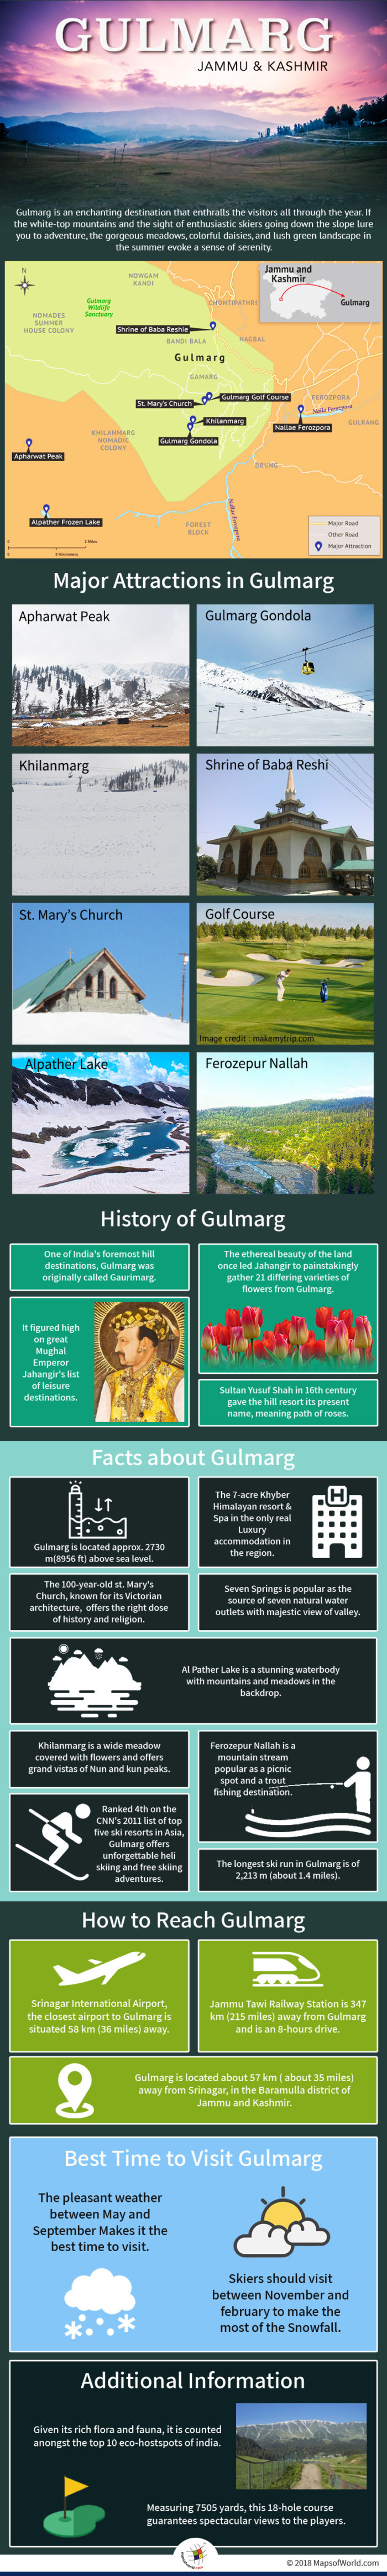 Infographic Depicting gulmarg's Attractions and Facts